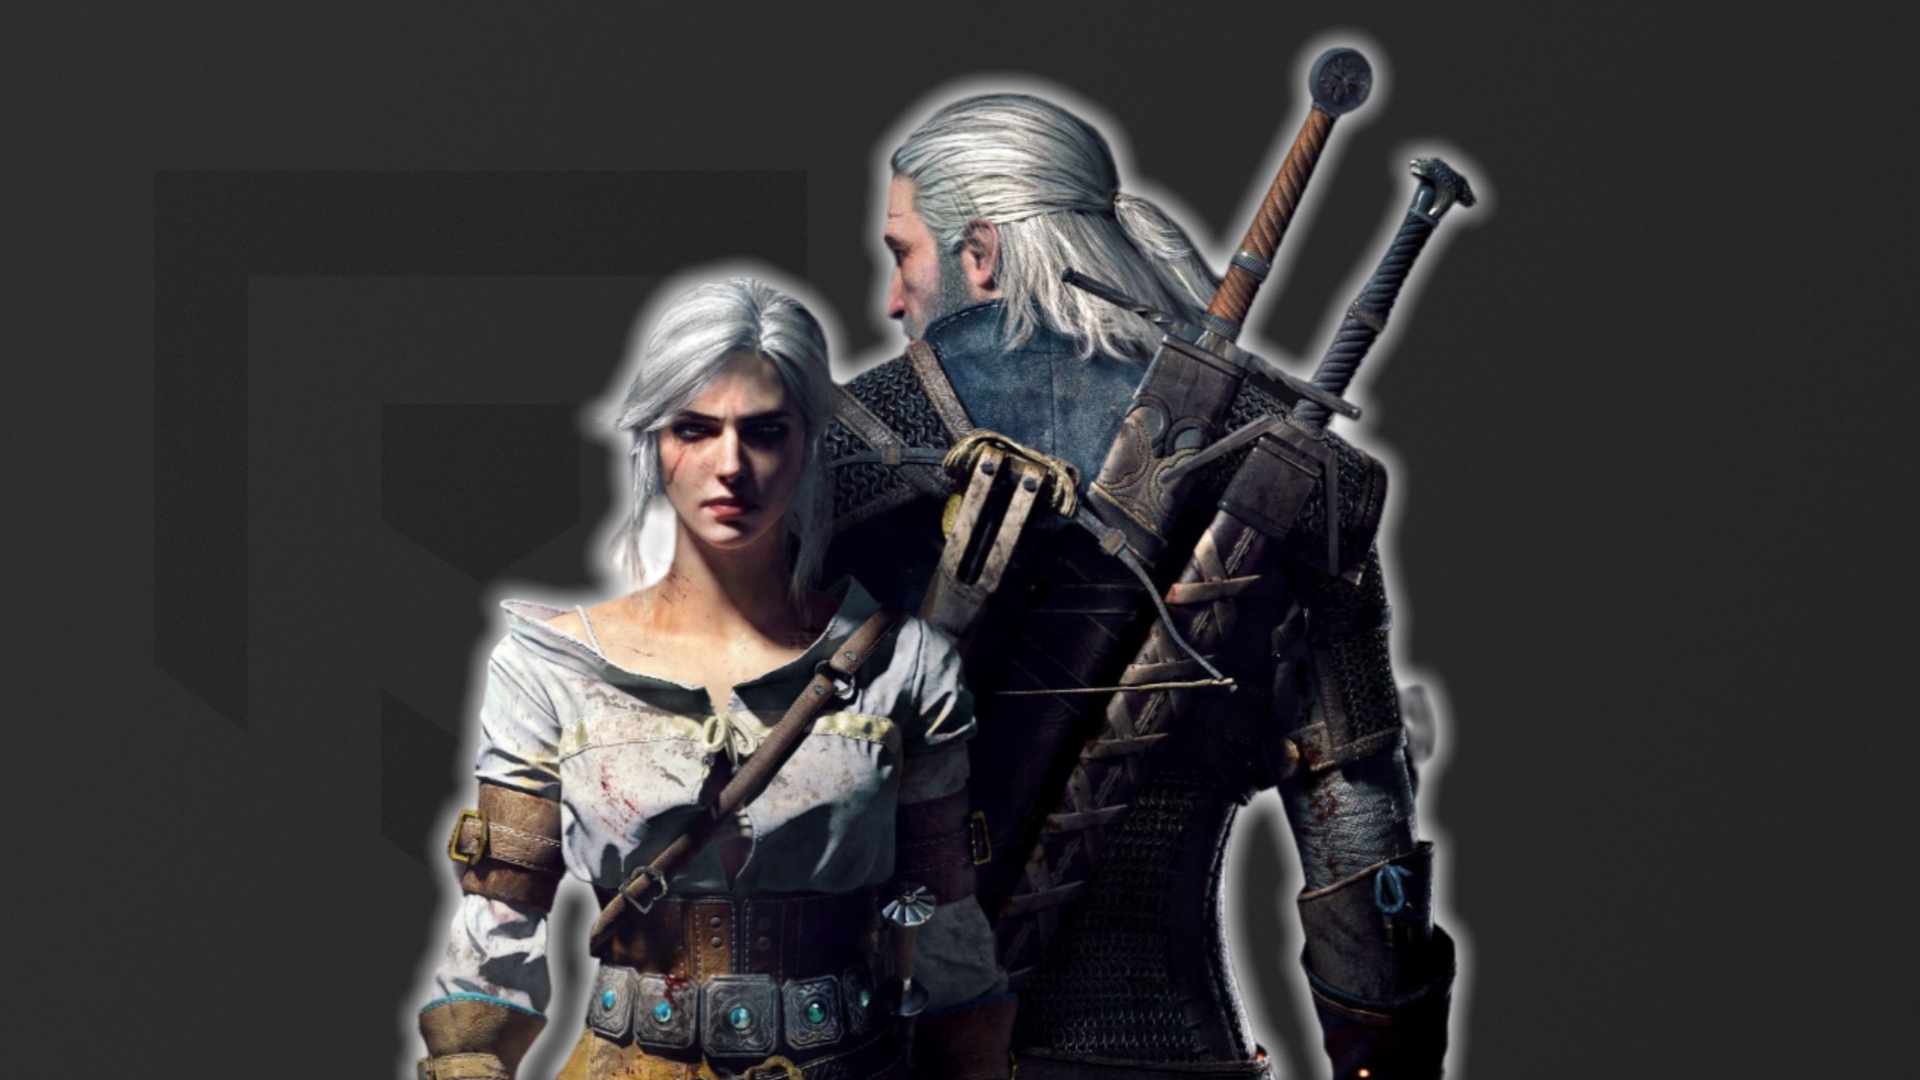 The Witcher Celebrates 10 Year Anniversary - The Witcher 3: Wild